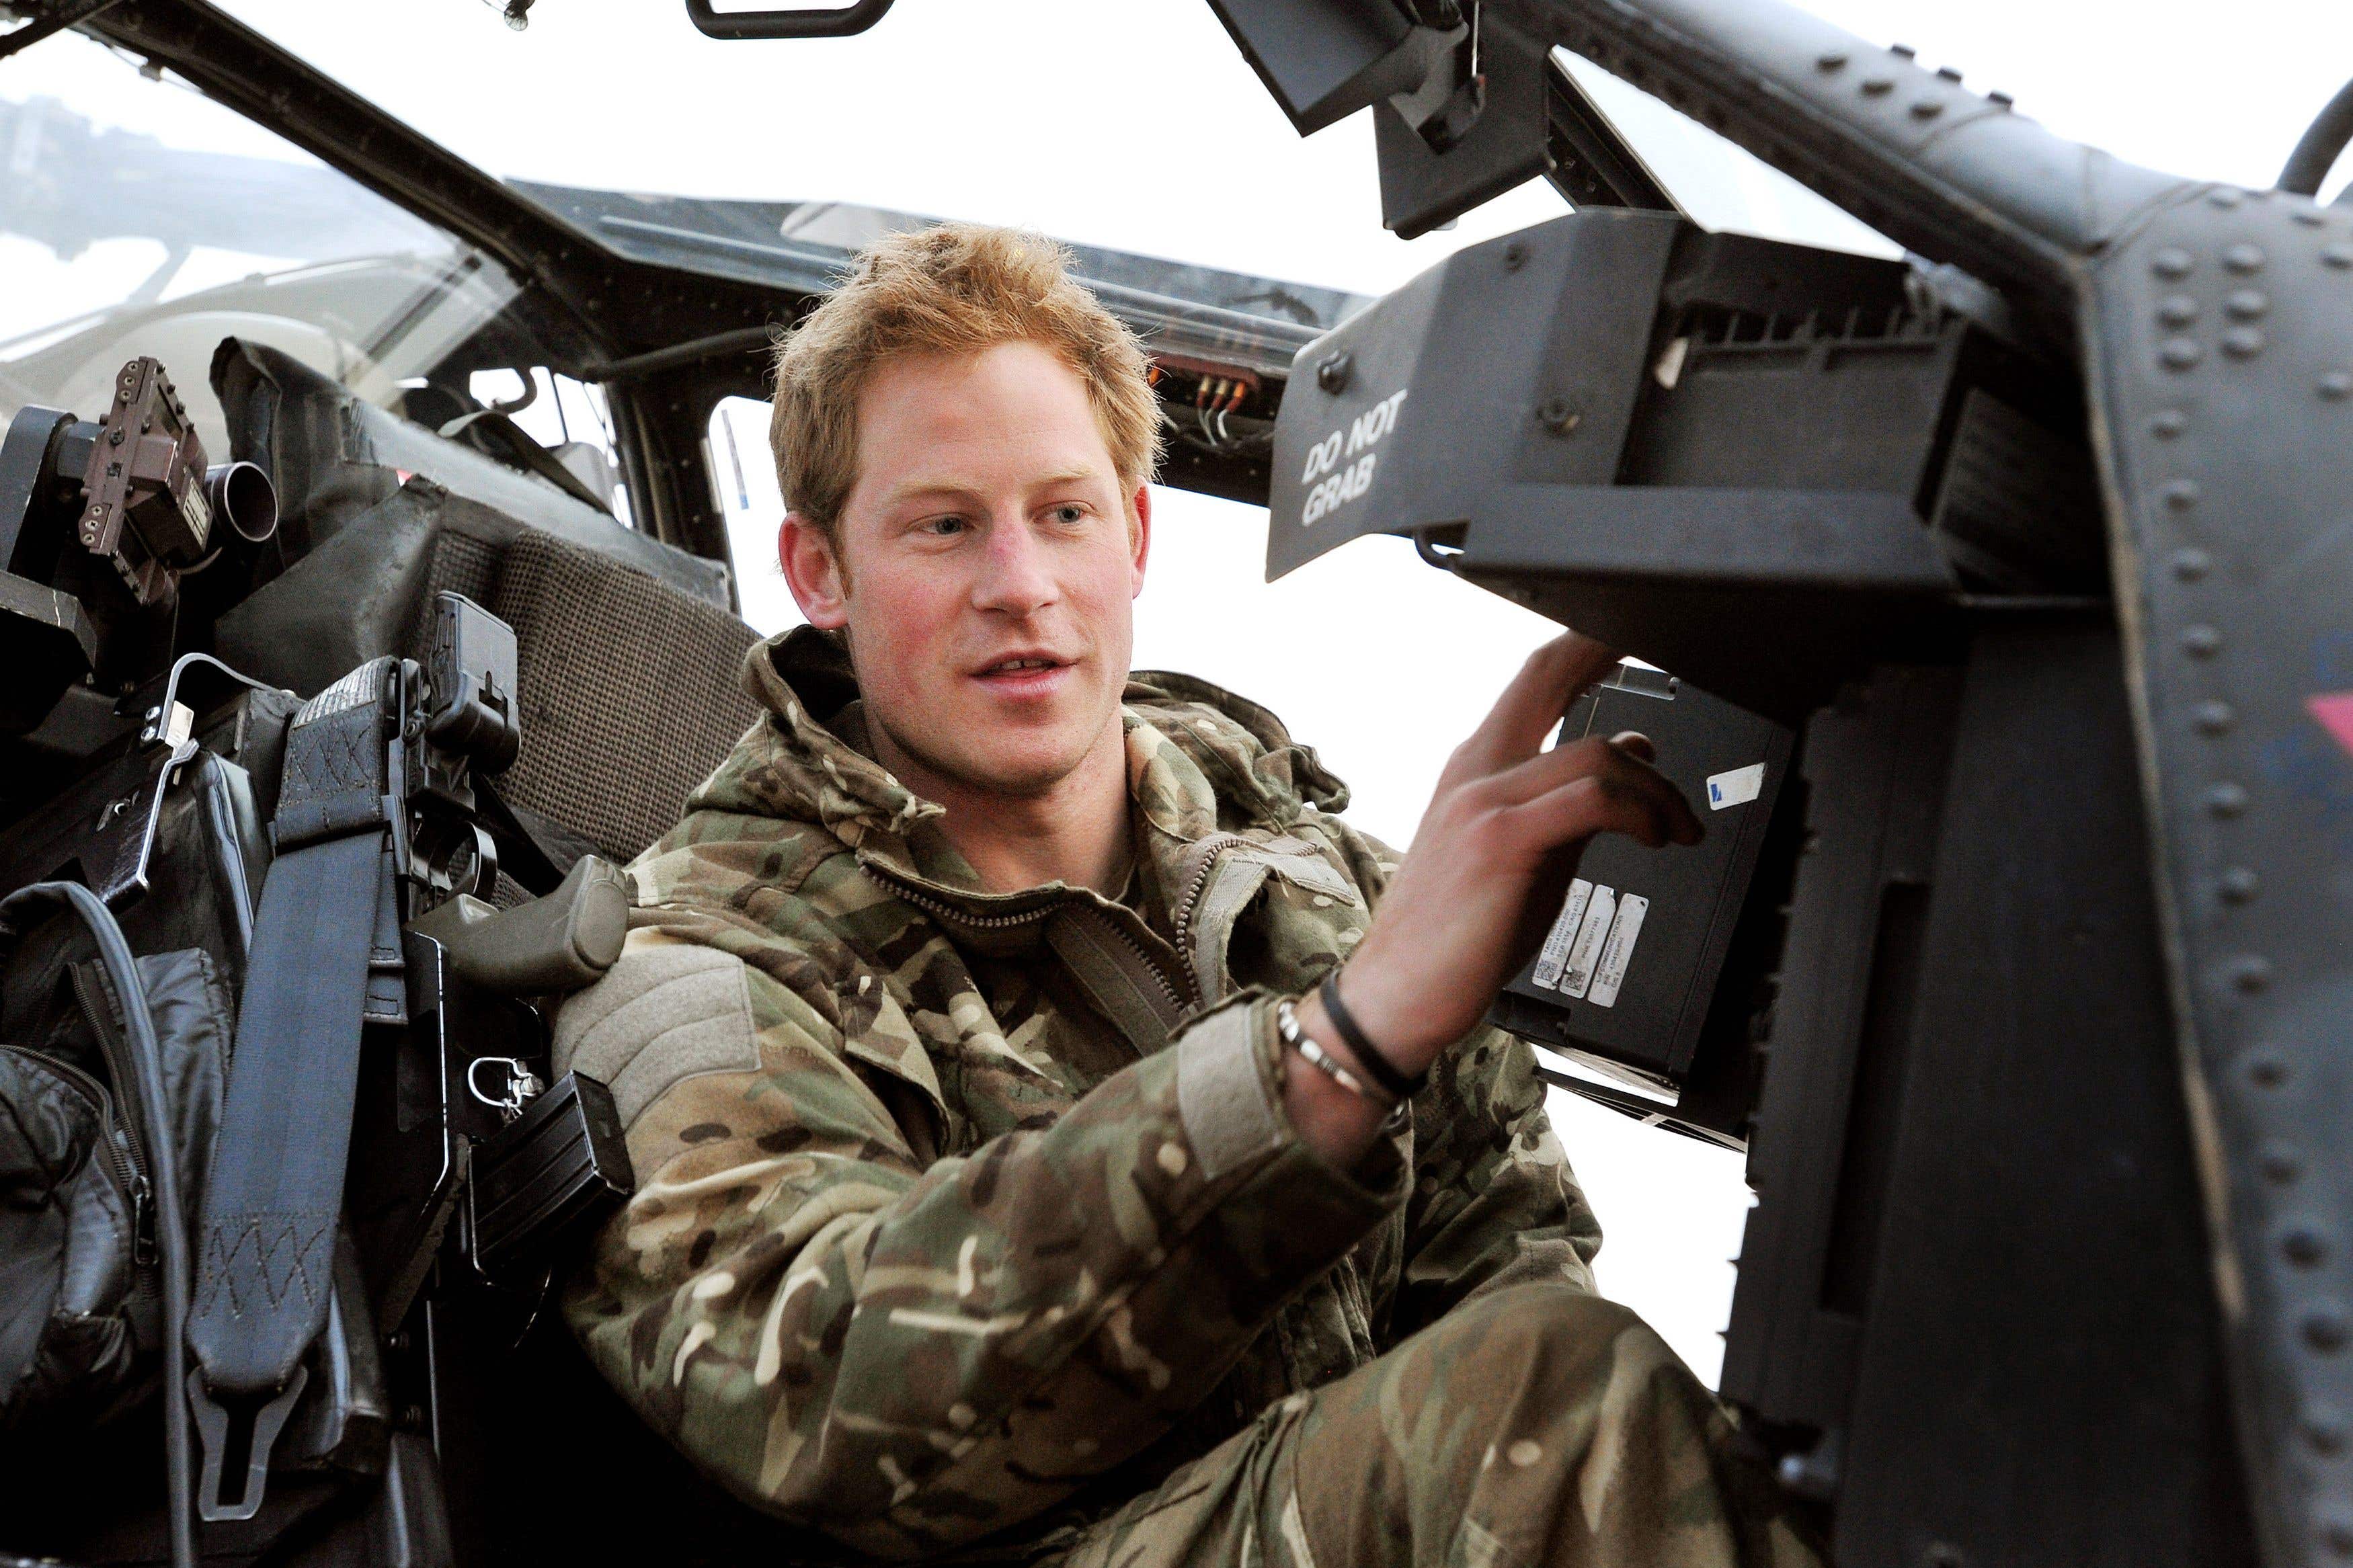 The Duke of Sussex says he killed 25 people while serving as an Apache helicopter pilot in Afghanistan